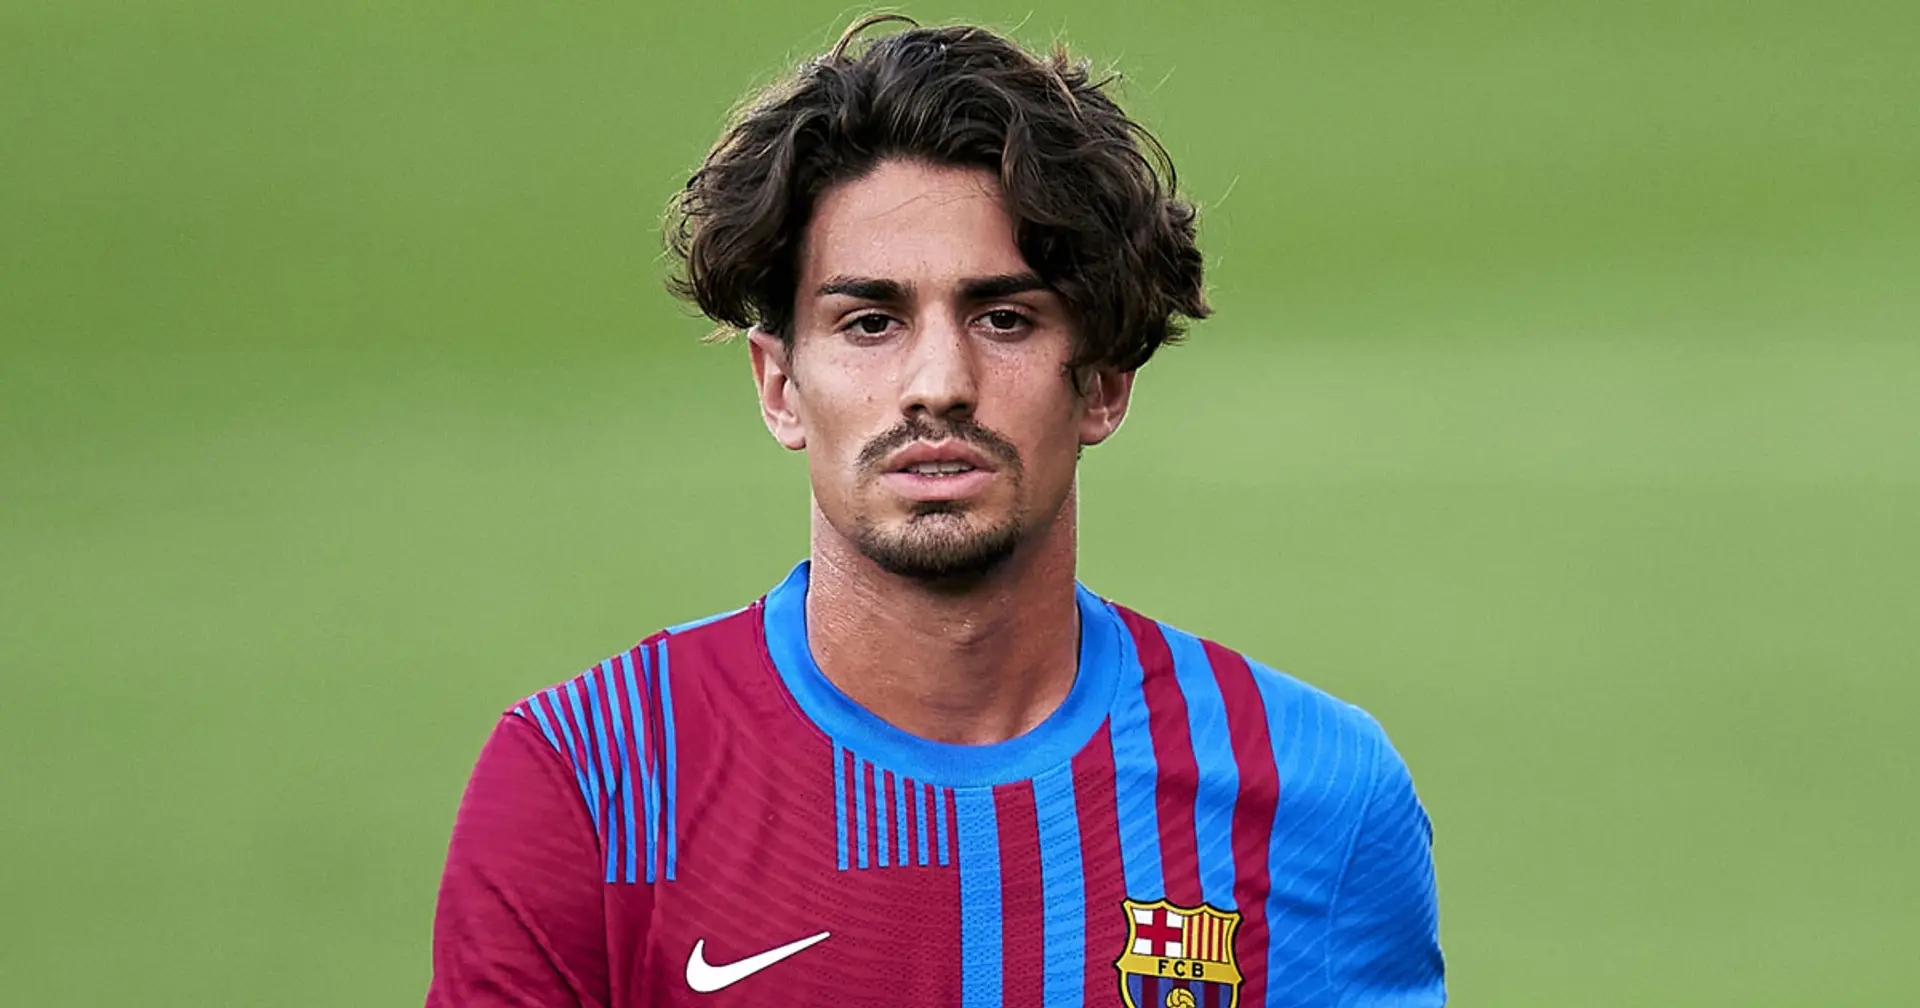 Barca B captain Alex Collado risks not playing until January due to Barcelona transfer incompetence